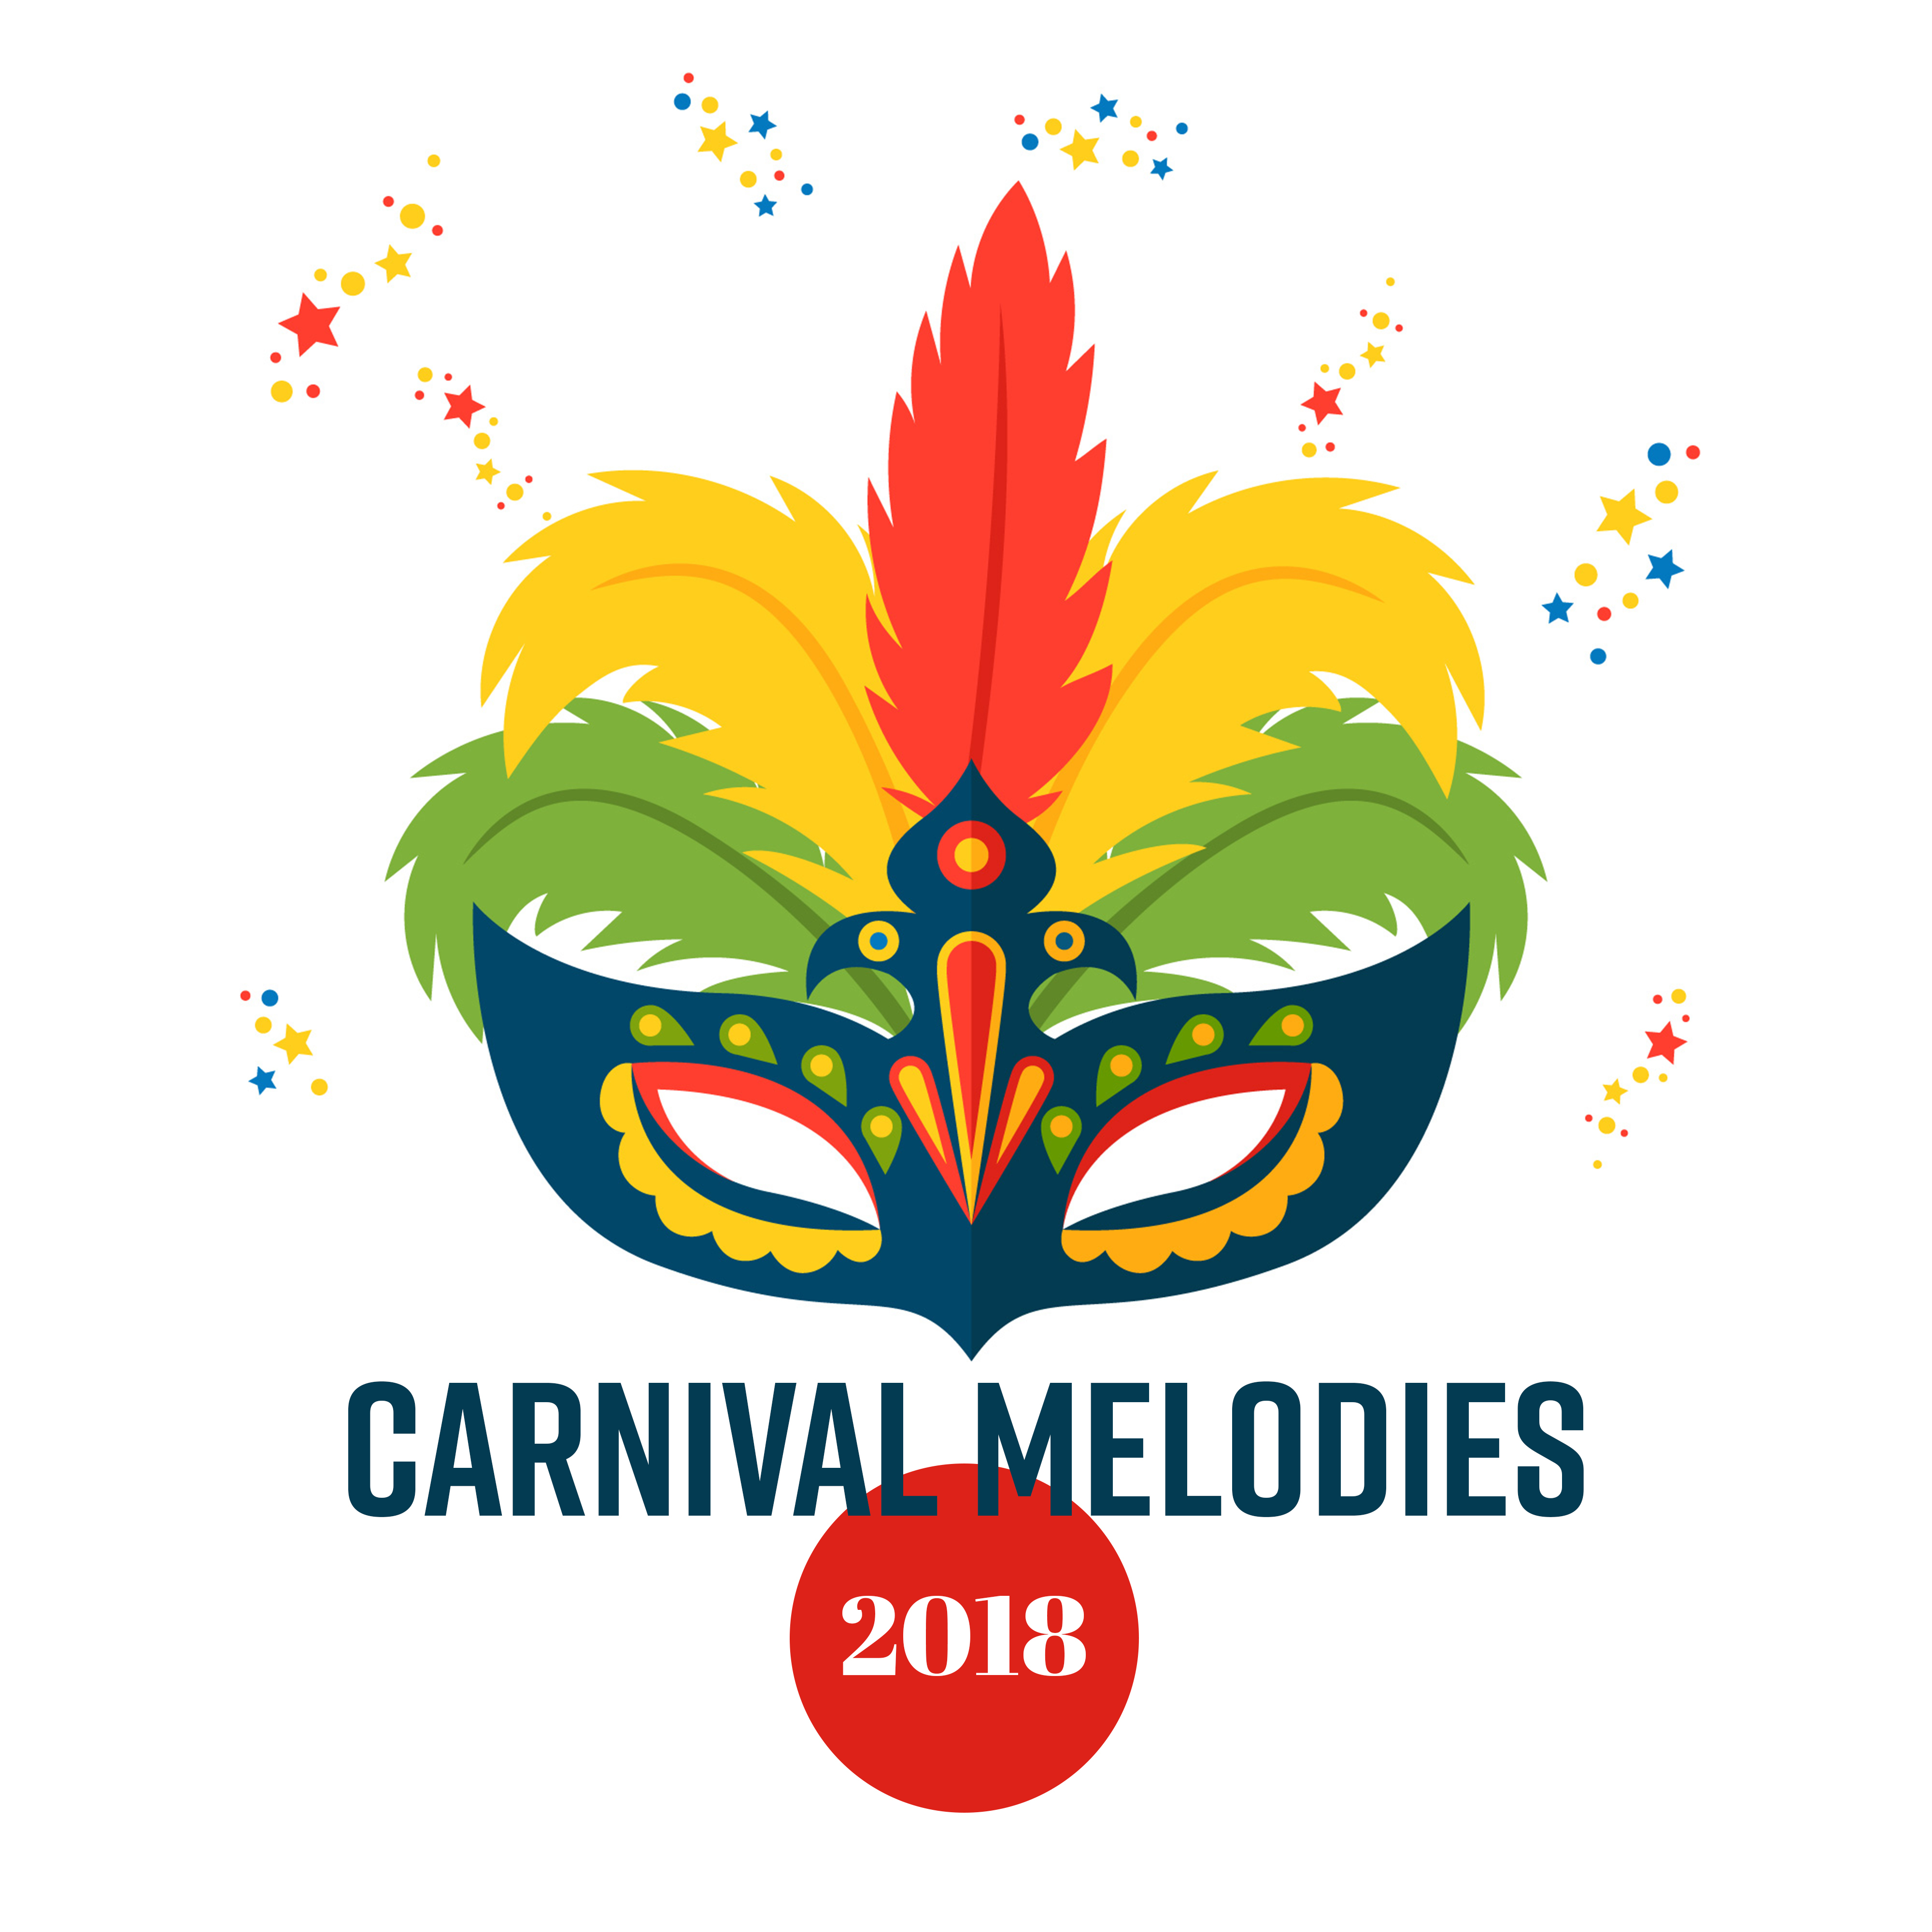 Carnival Melodies 2018